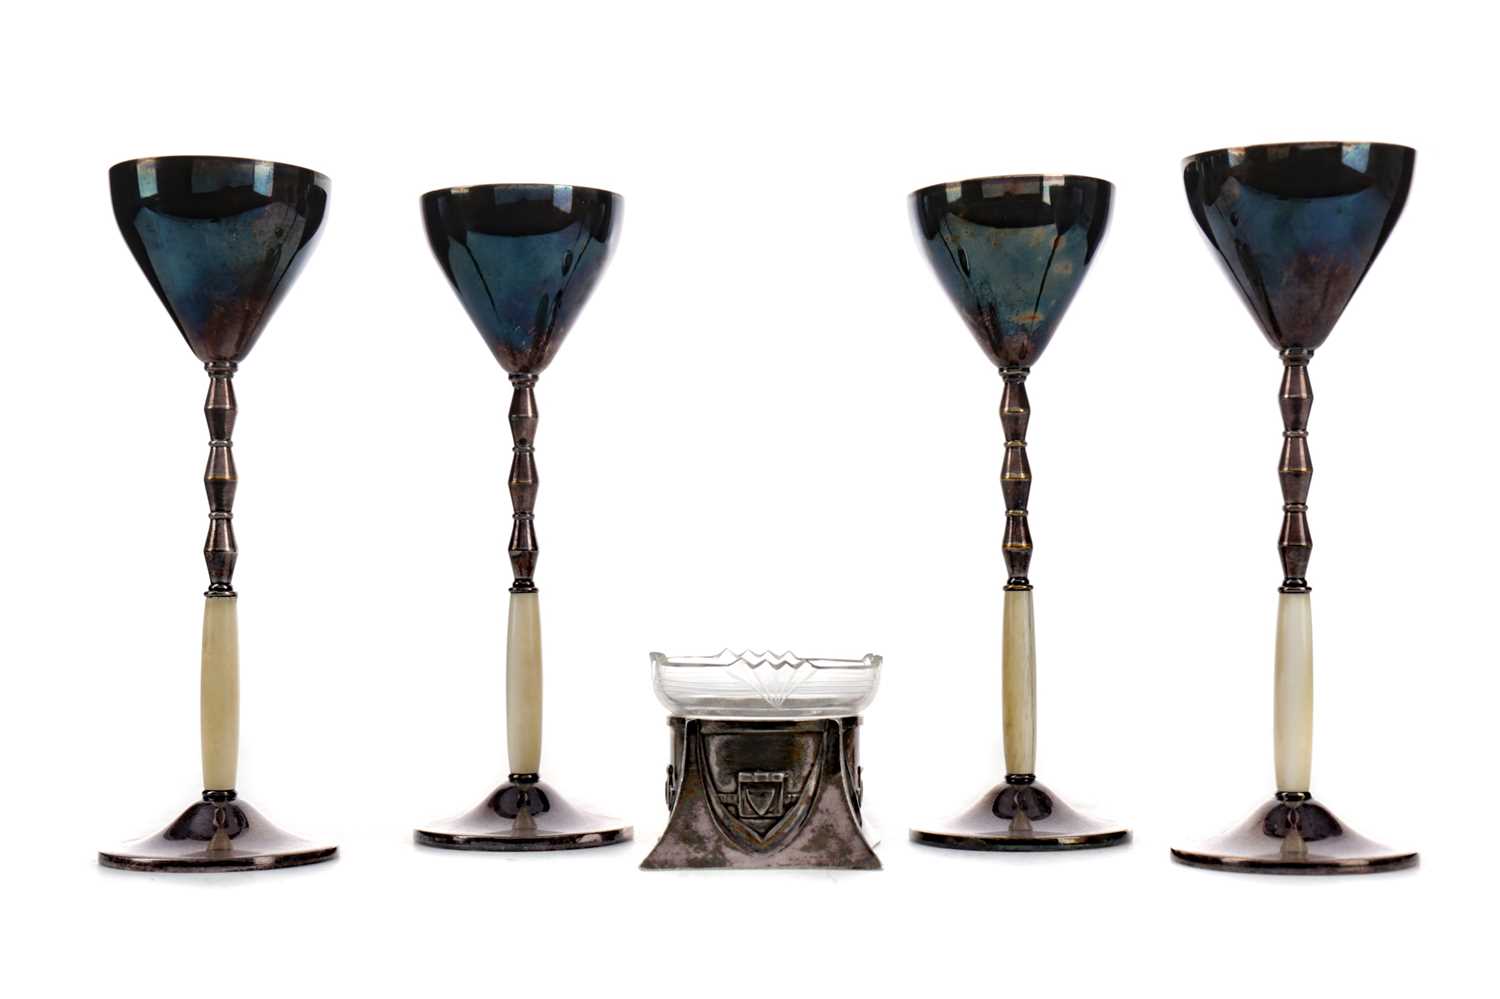 Lot 403 - SET OF FOUR EARLY 20TH CENTURY WMF SILVER PLATED LIQUEUR GLASSES, ALONG WITH AN OPEN SALT